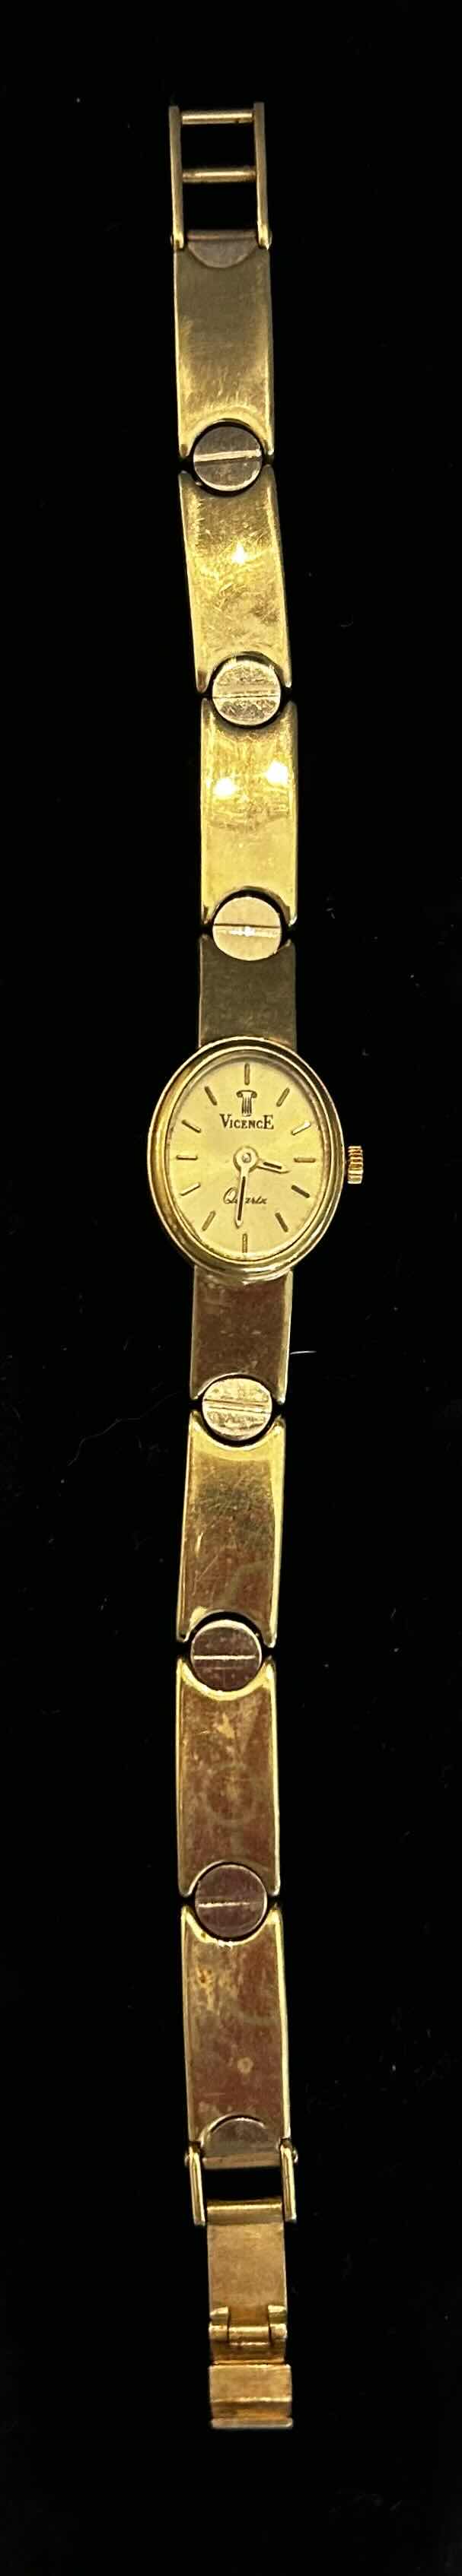 Photo 7 of SOLID 14K GOLD MADE IN ITALY QUARTZ WATCH WITH SOLID 14K BRACELET WATCH BAND